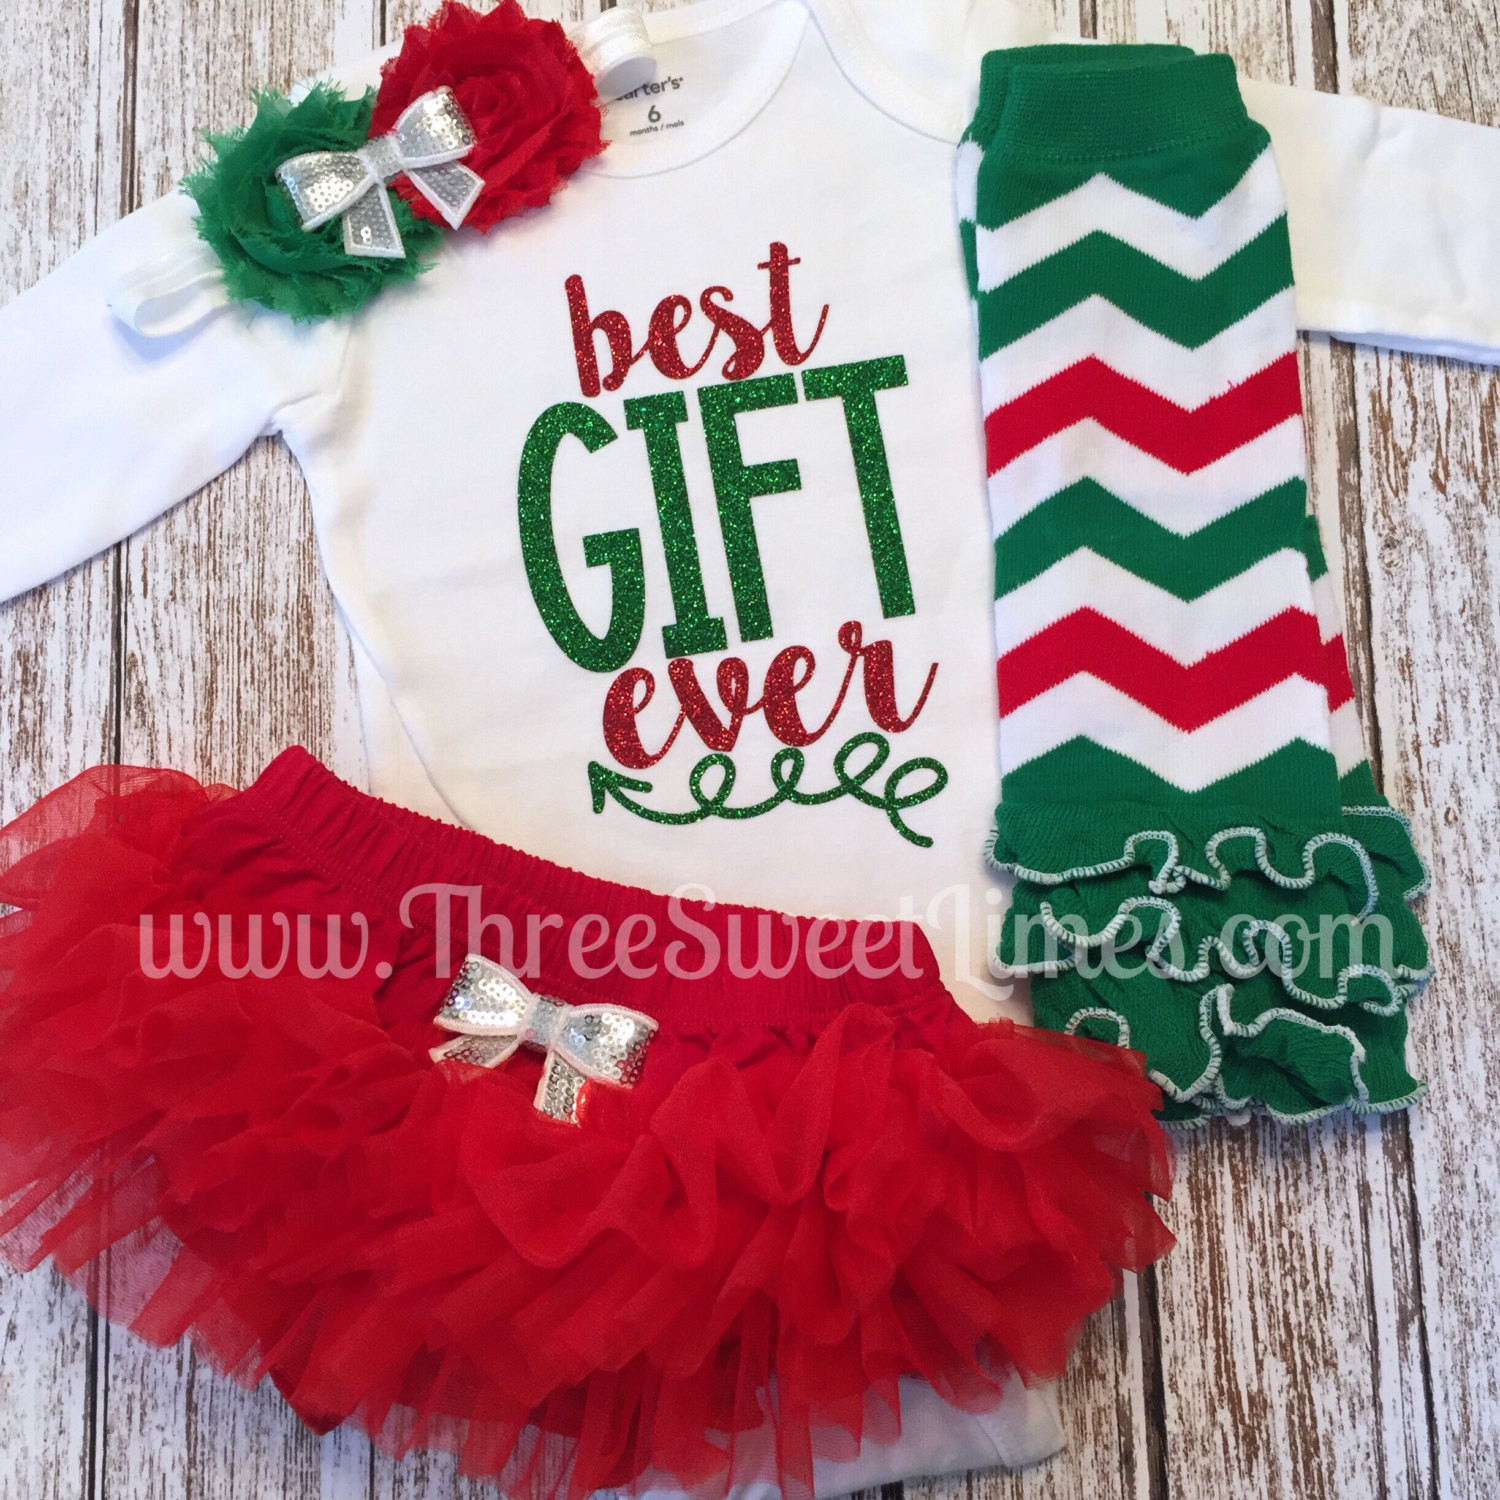 Best Christmas Gift Ever
 Baby Girl Christmas Outfit Best Gift Ever by ThreeSweetLimes